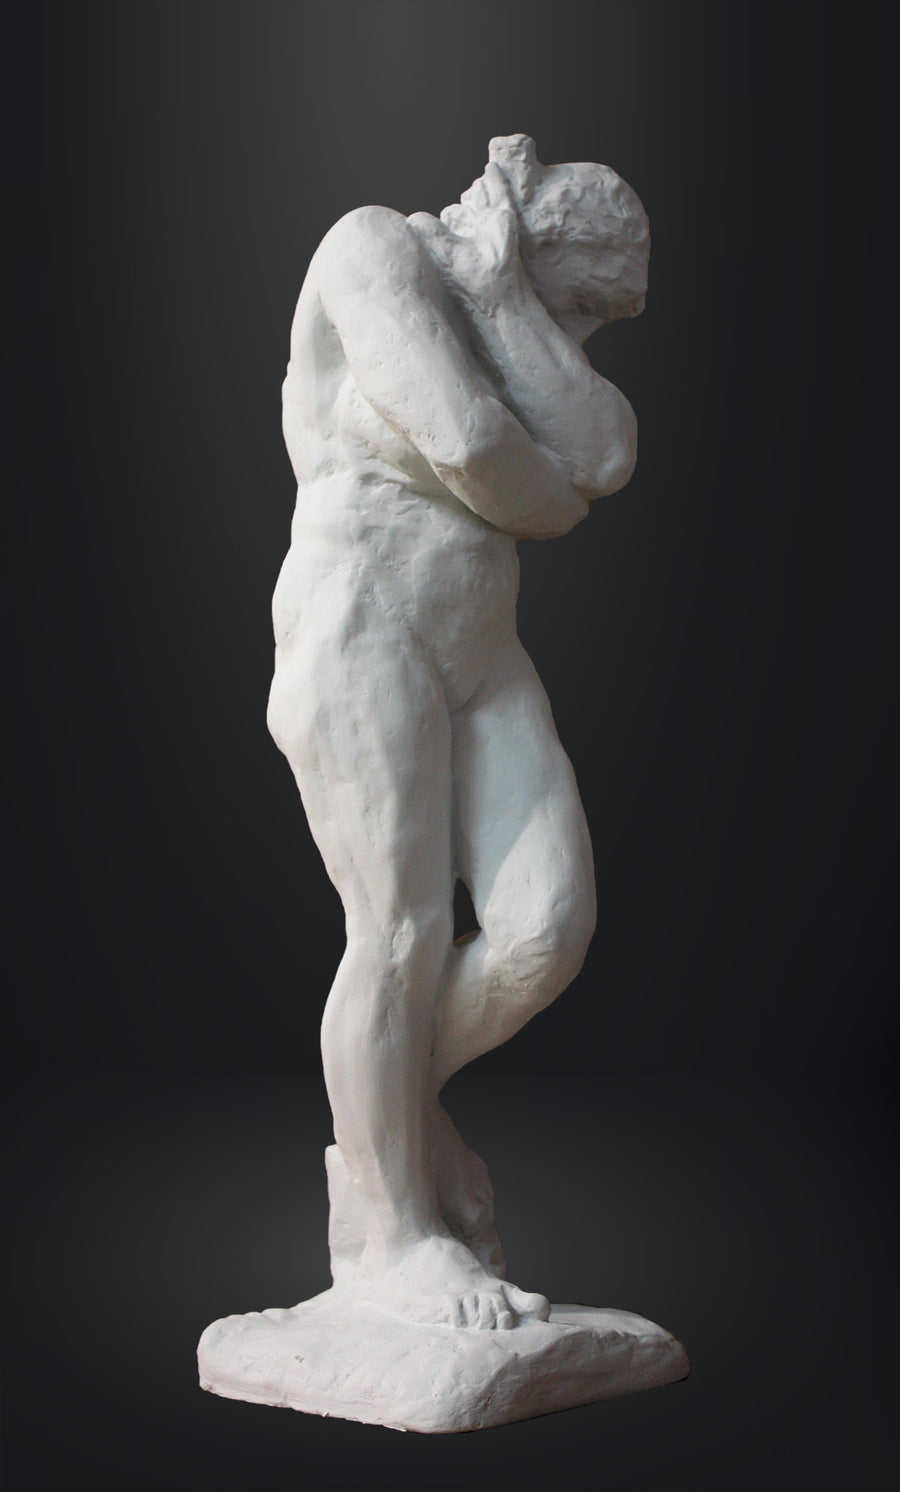 photo of white plaster cast sculpture of nude female figure hugging herself against gray background